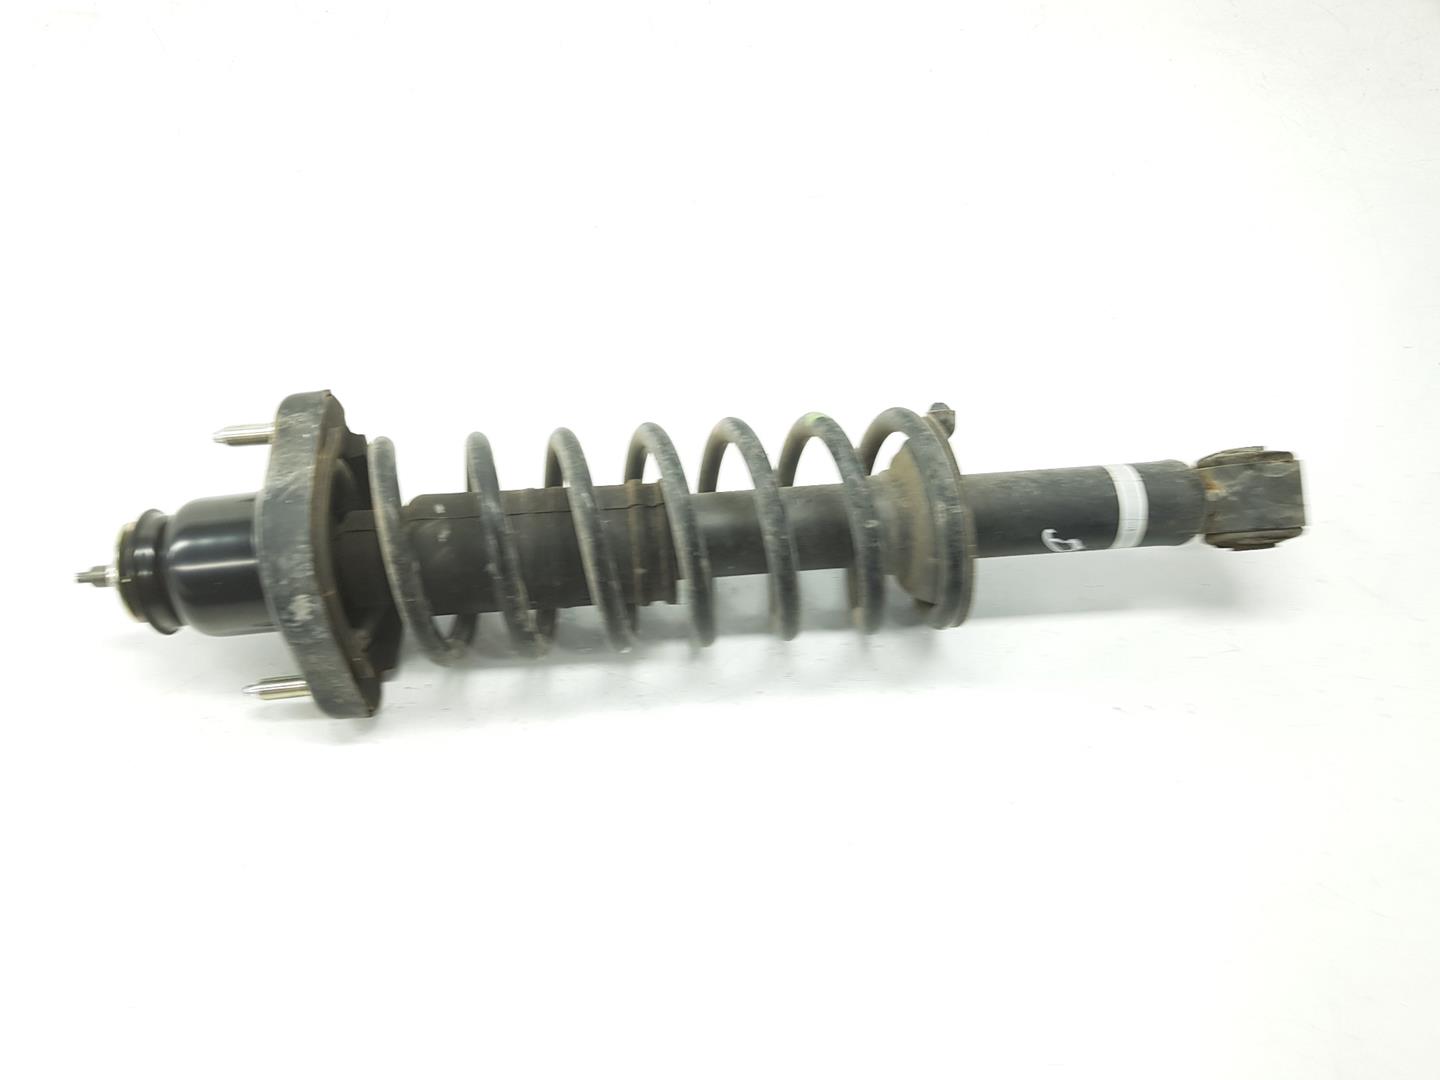 MITSUBISHI ASX 1 generation (2010-2020) Rear Right Shock Absorber 4162A401, 4162A401 19636244